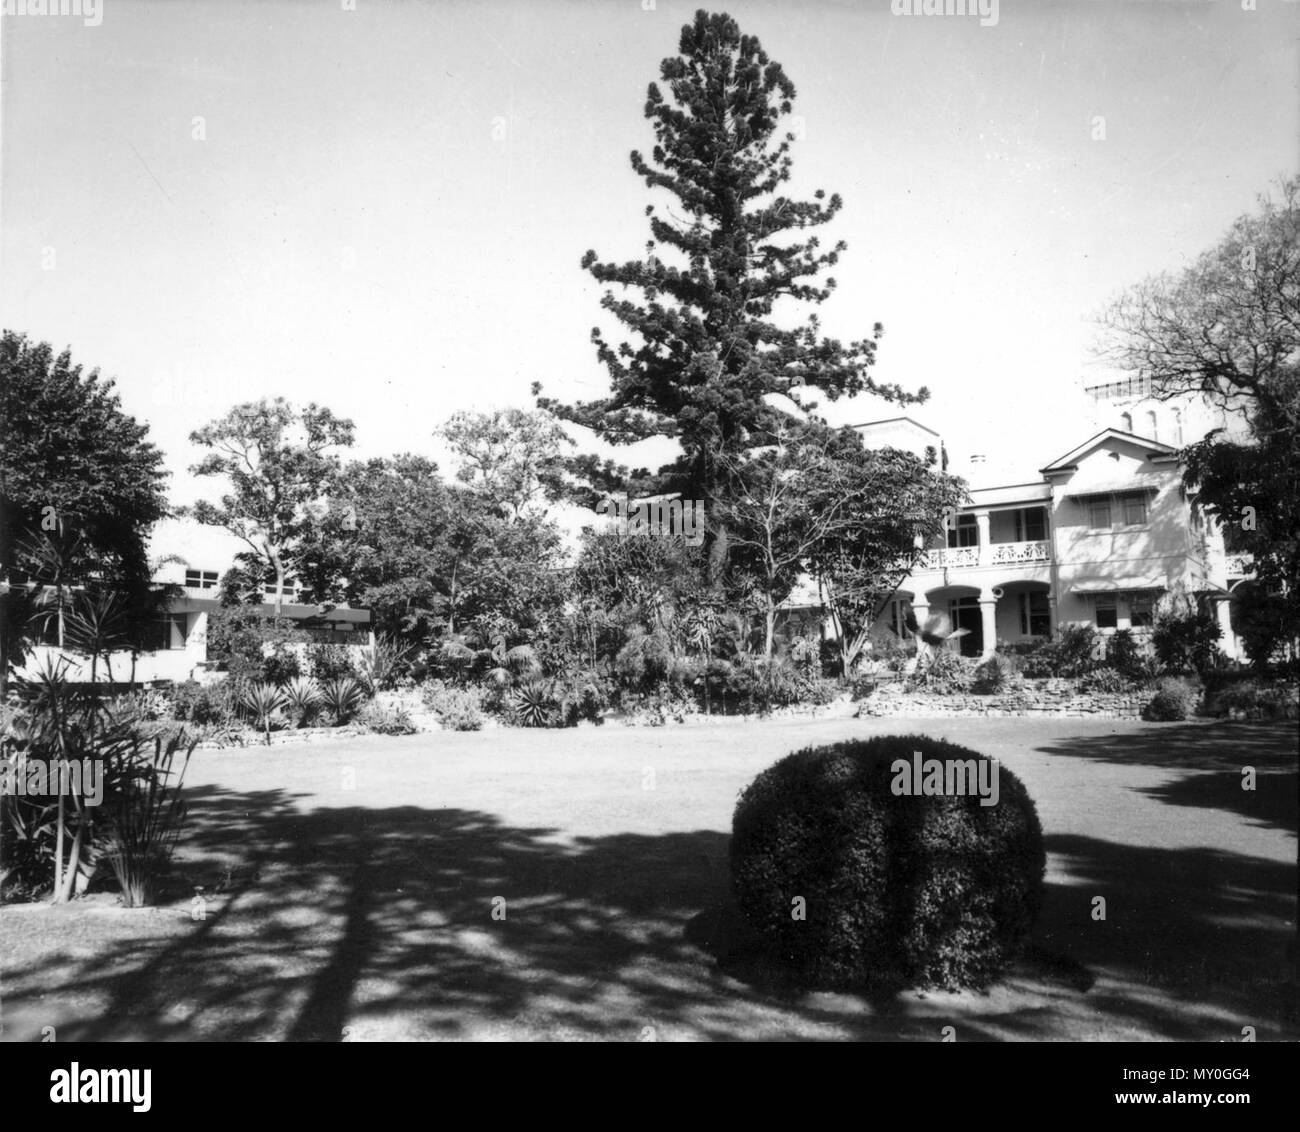 Yungaba Migrant Hostel, Kangaroo Point, August 1972. From the Queensland Heritage Registerid=600245 ) .  Yungaba is a two-storey brick institutional building designed as an immigrant depot in 1885 by John James Clark, colonial architect for Queensland. Following his dismissal shortly after, the plan was developed by Edward Henry Alder and Robert Henry Mills. Constructed by William Peter Clark, the building is described as being of Italianate/Queensland/ Institutional style.  Following the subdivision of Kangaroo Point in 1843-44, lots 21 and 22 were purchased by Judah and Isaac Solomon and Tho Stock Photo